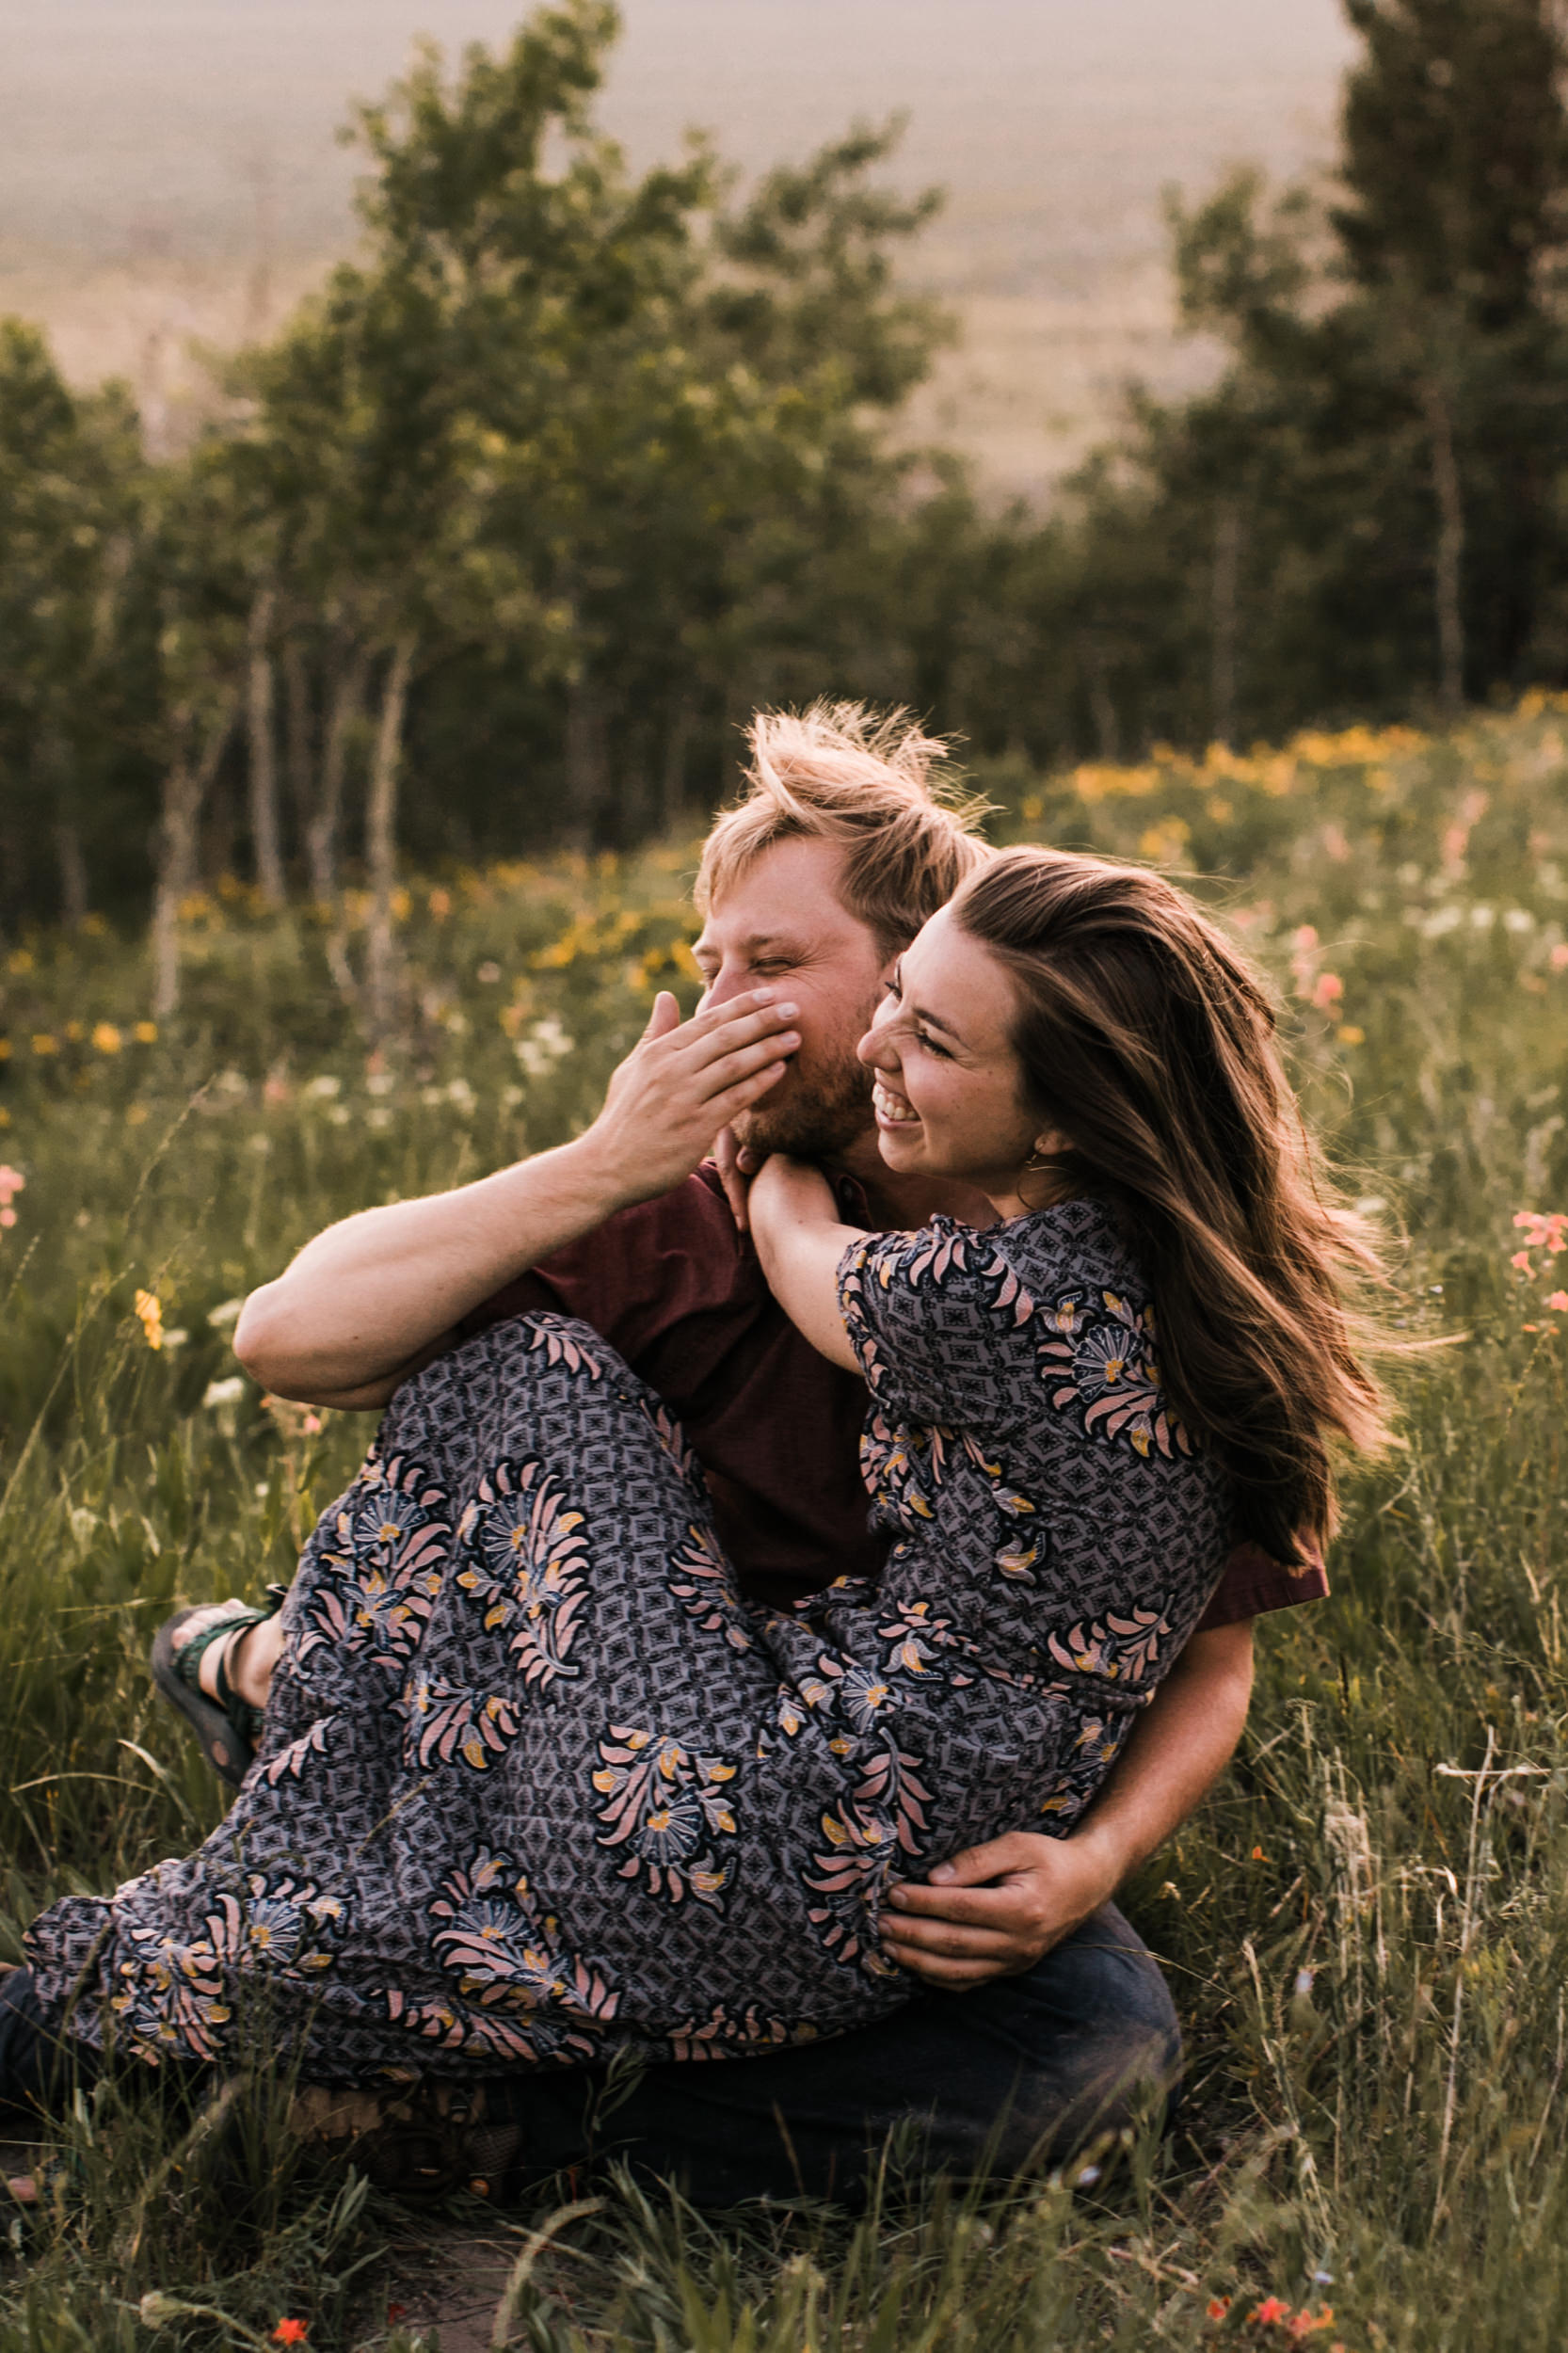 maggie + gary's adventure engagement session in grand teton national park | jackson hole, wyoming wedding photographer | the hearnes adventure photography